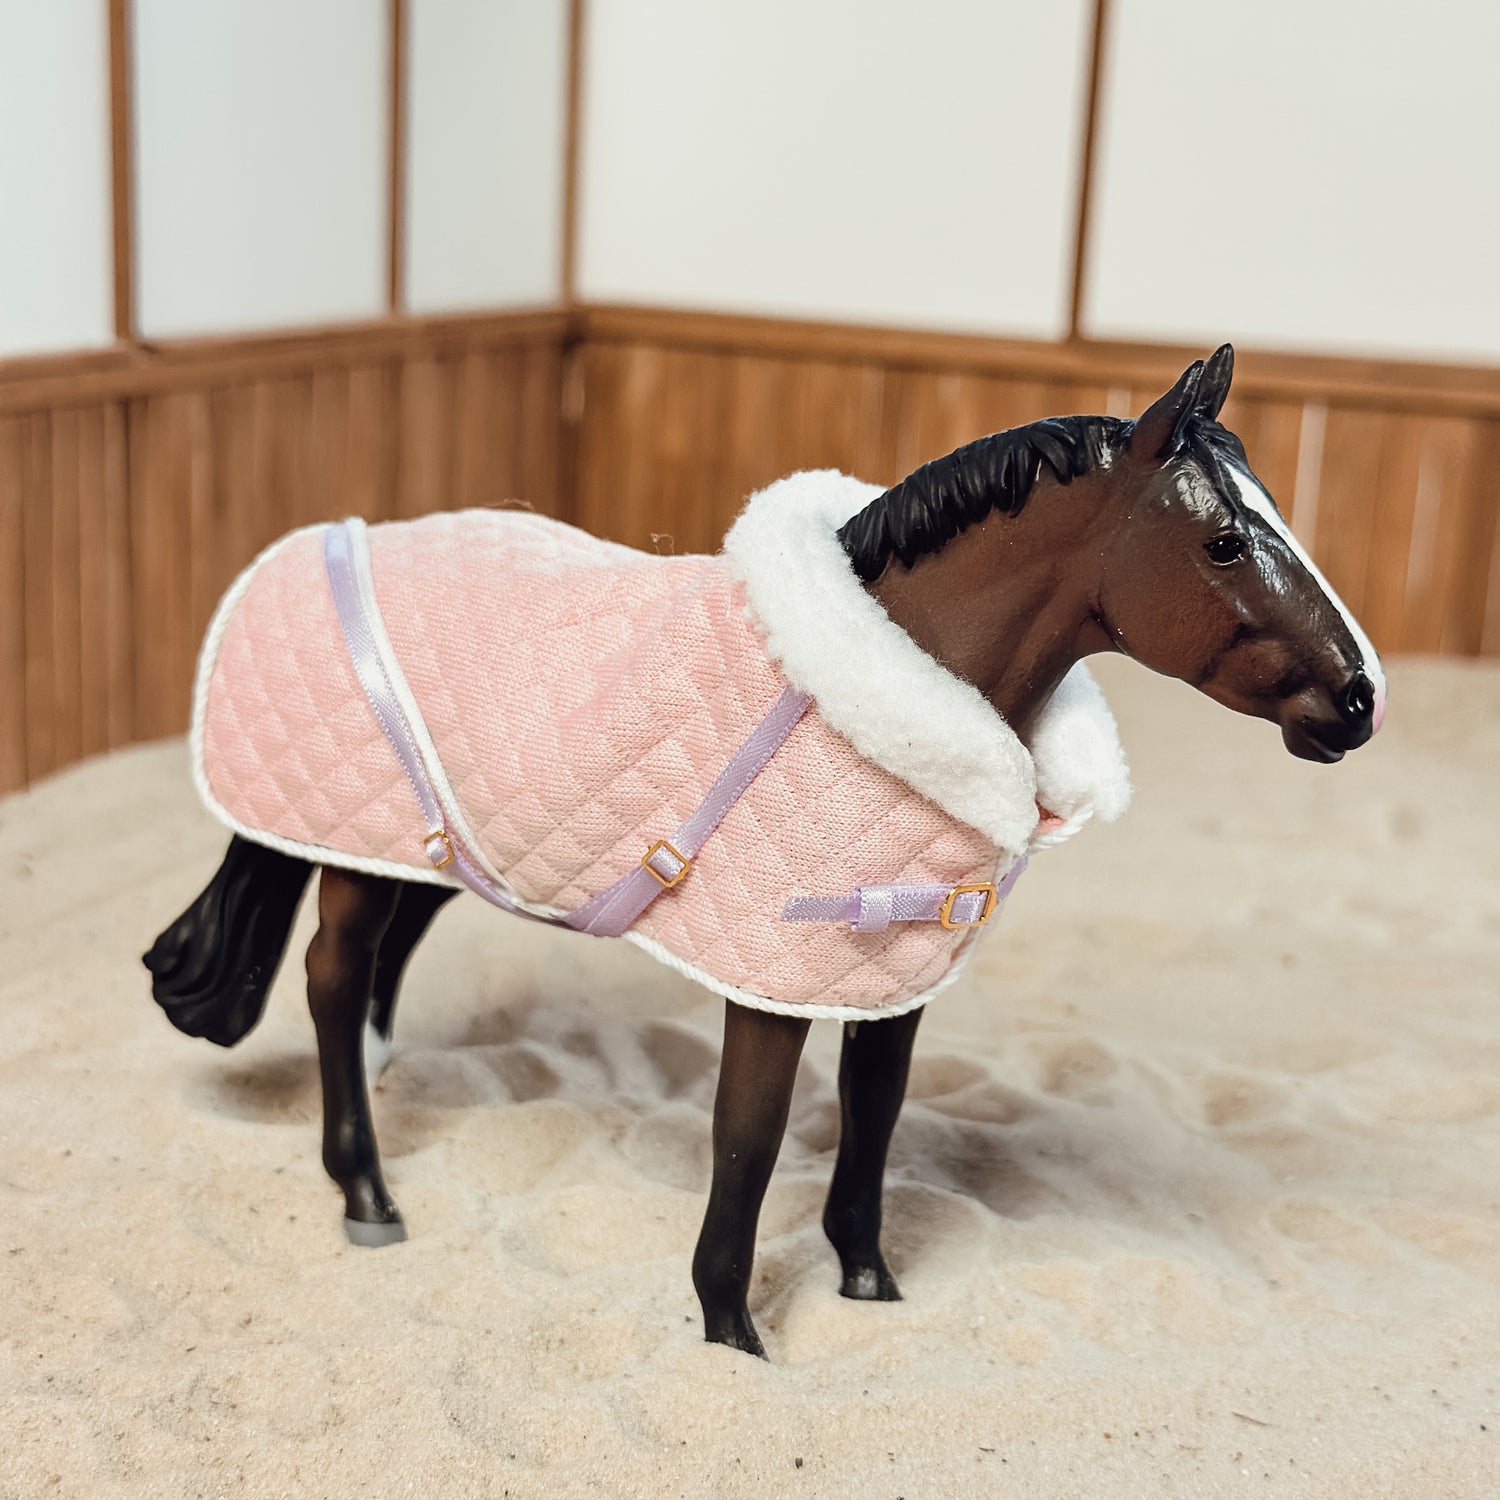 Tack KITS for Schleich Horses